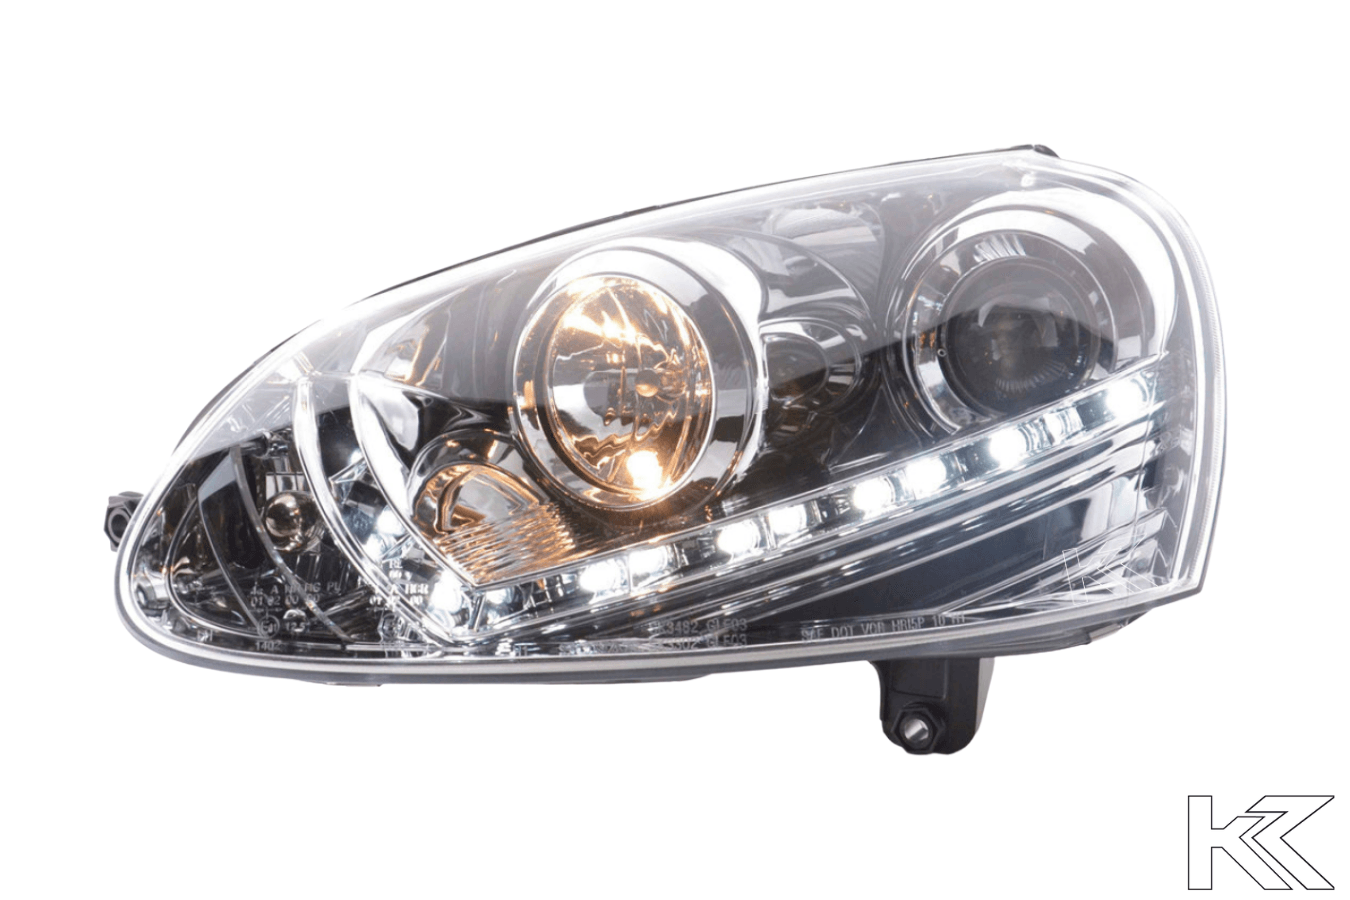 Volkswagen Golf 5 Chrome LED Headlights with Daytime Running Lights (2003 - 2008) - With R87 approval - K2 Industries